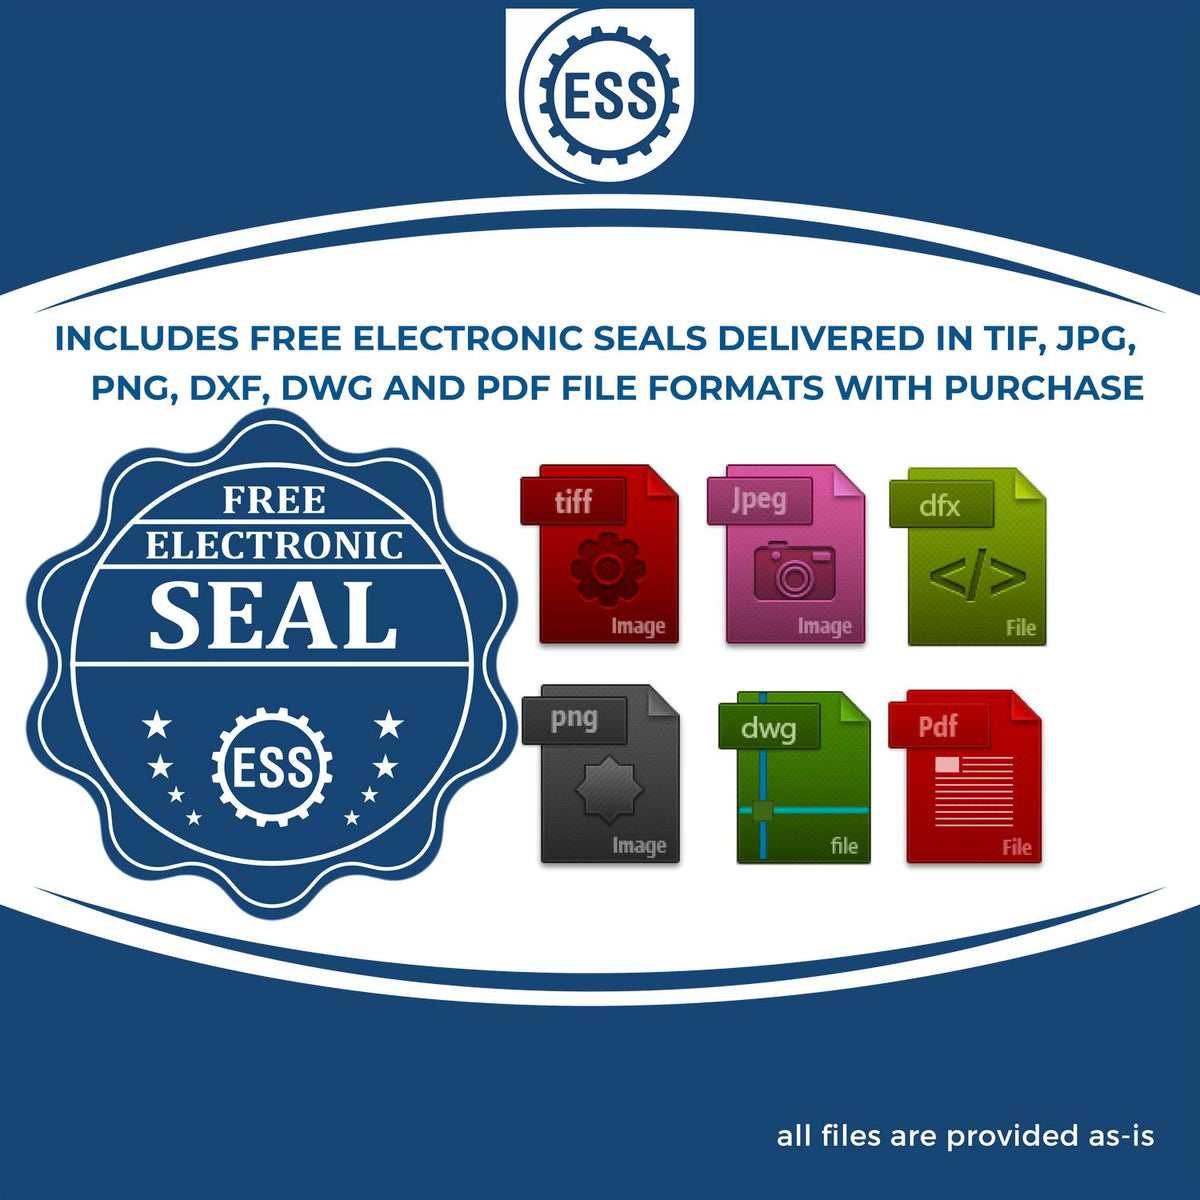 An infographic for the free electronic seal for the MaxLight Premium Pre-Inked New Jersey State Seal Notarial Stamp illustrating the different file type icons such as DXF, DWG, TIF, JPG and PNG.